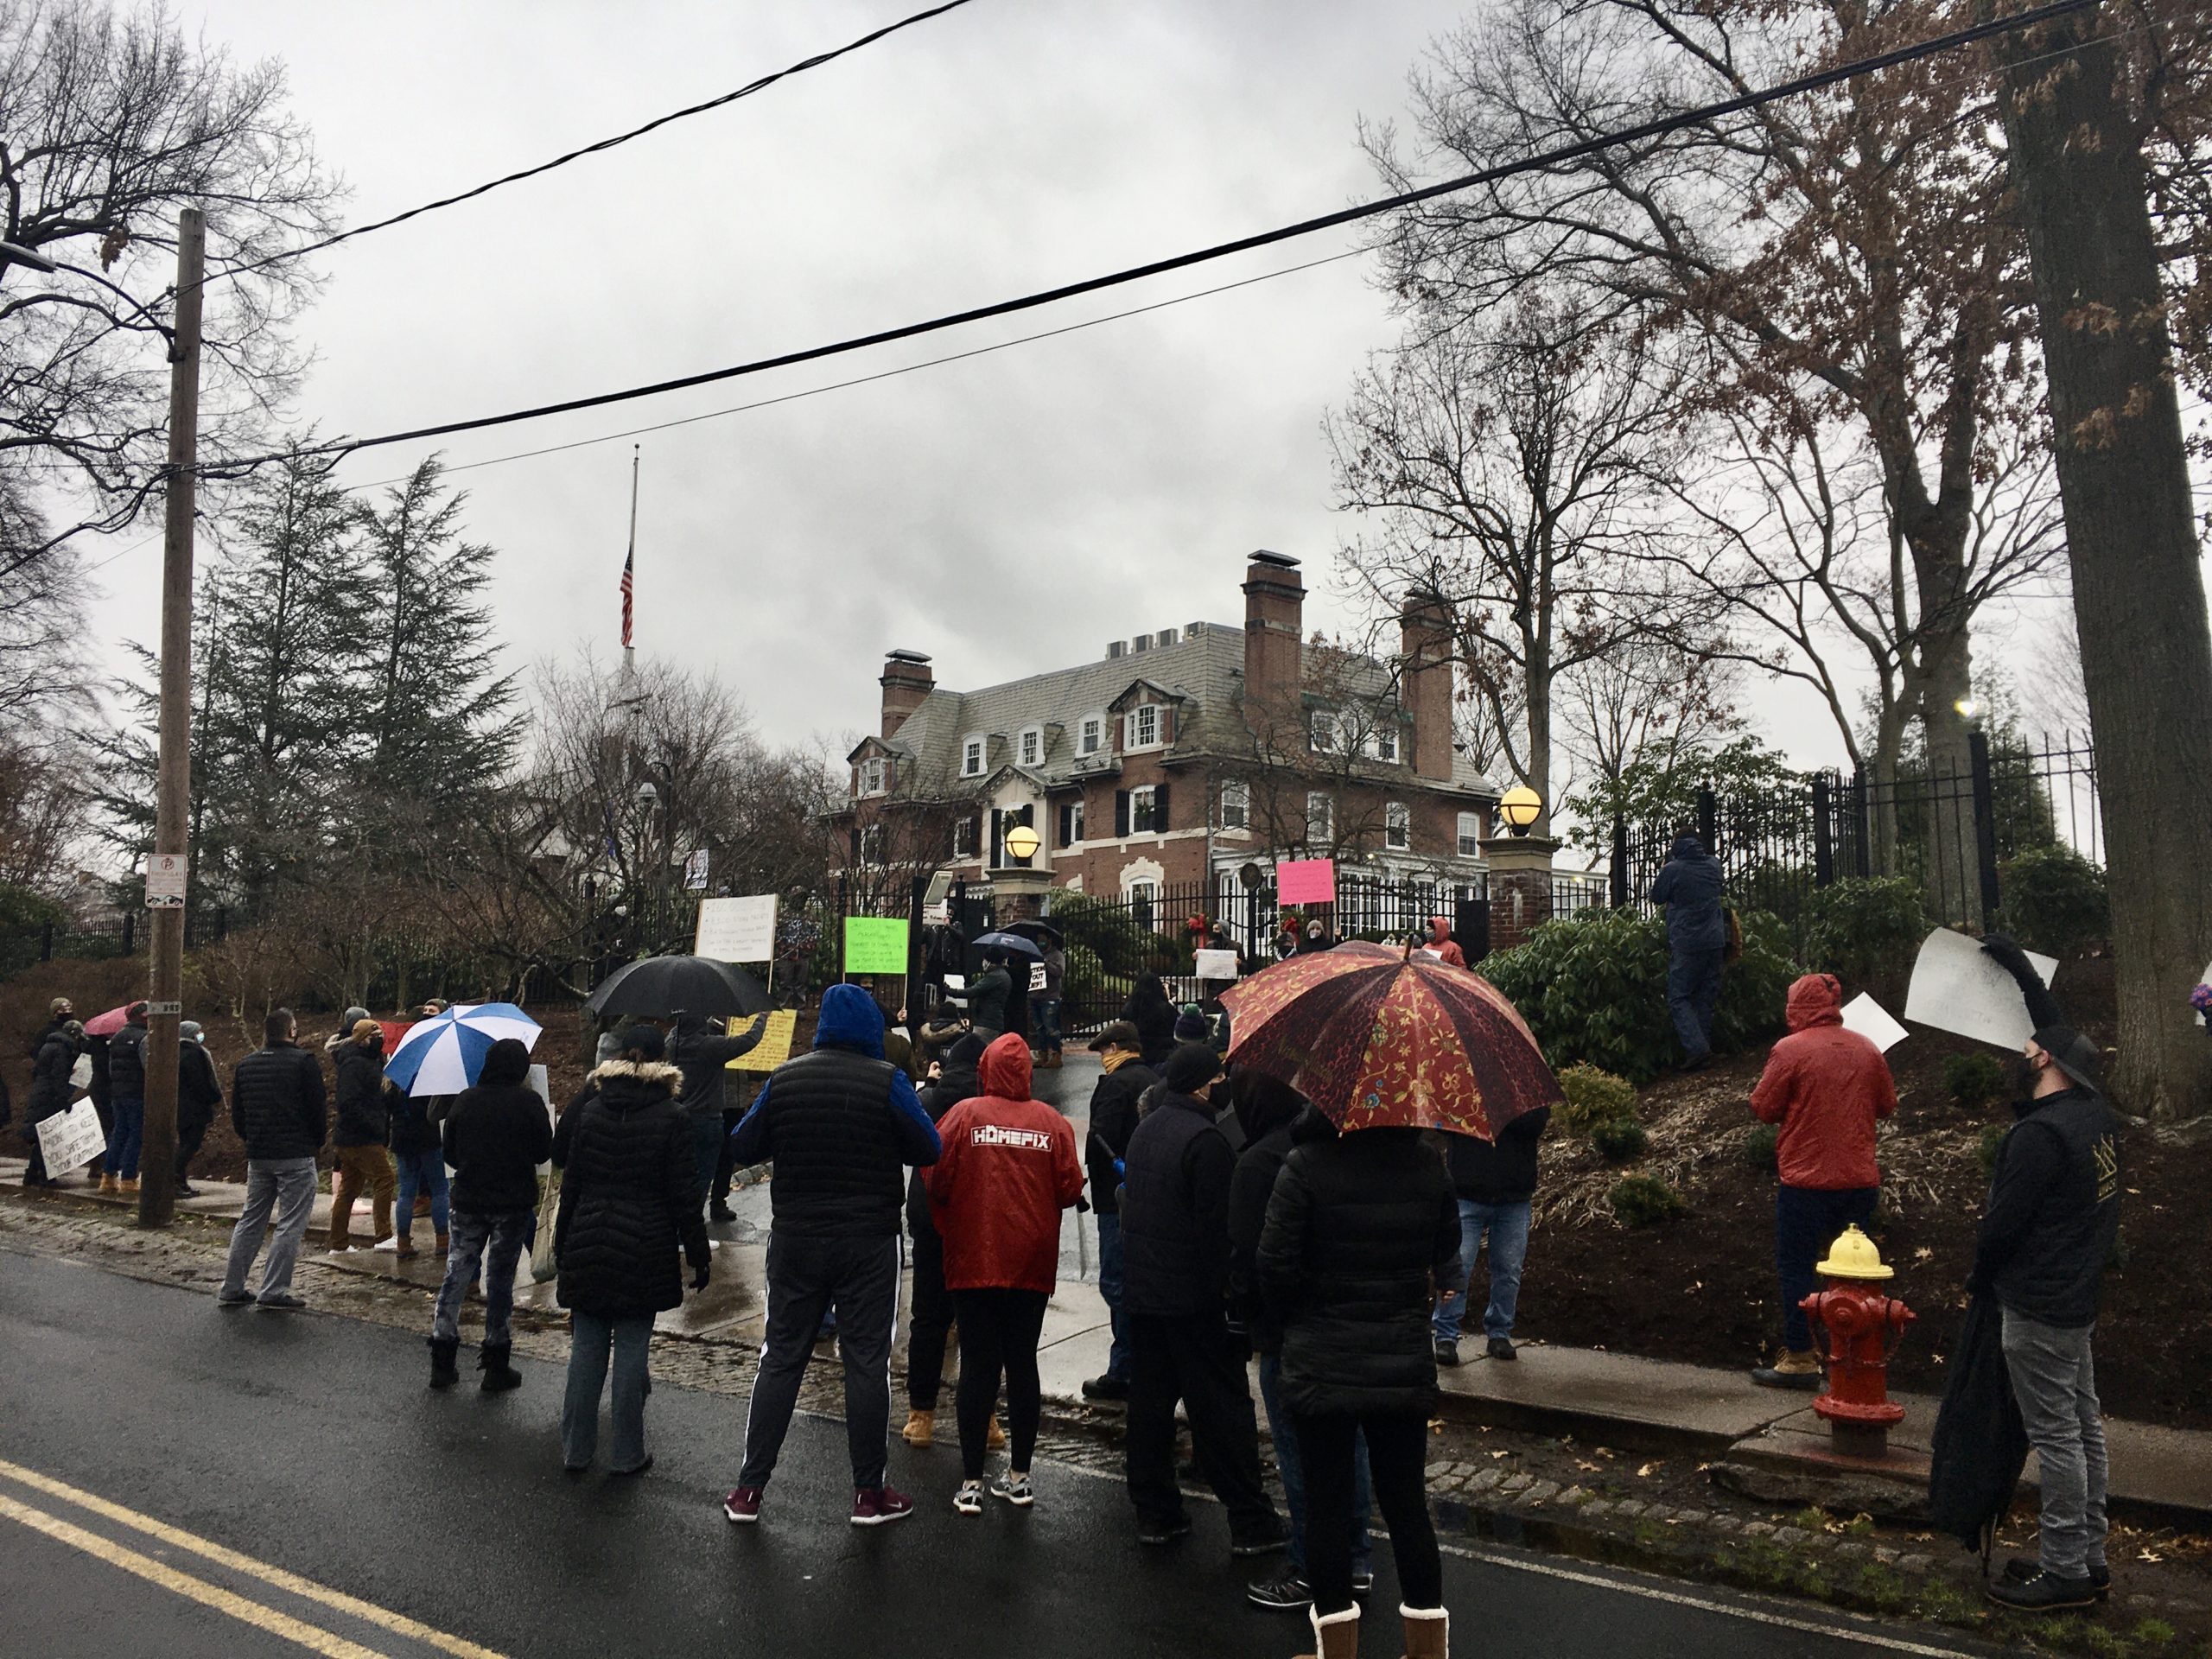 Restaurant workers protest outside Governor’s Residence: “Nobody is seeing us.”